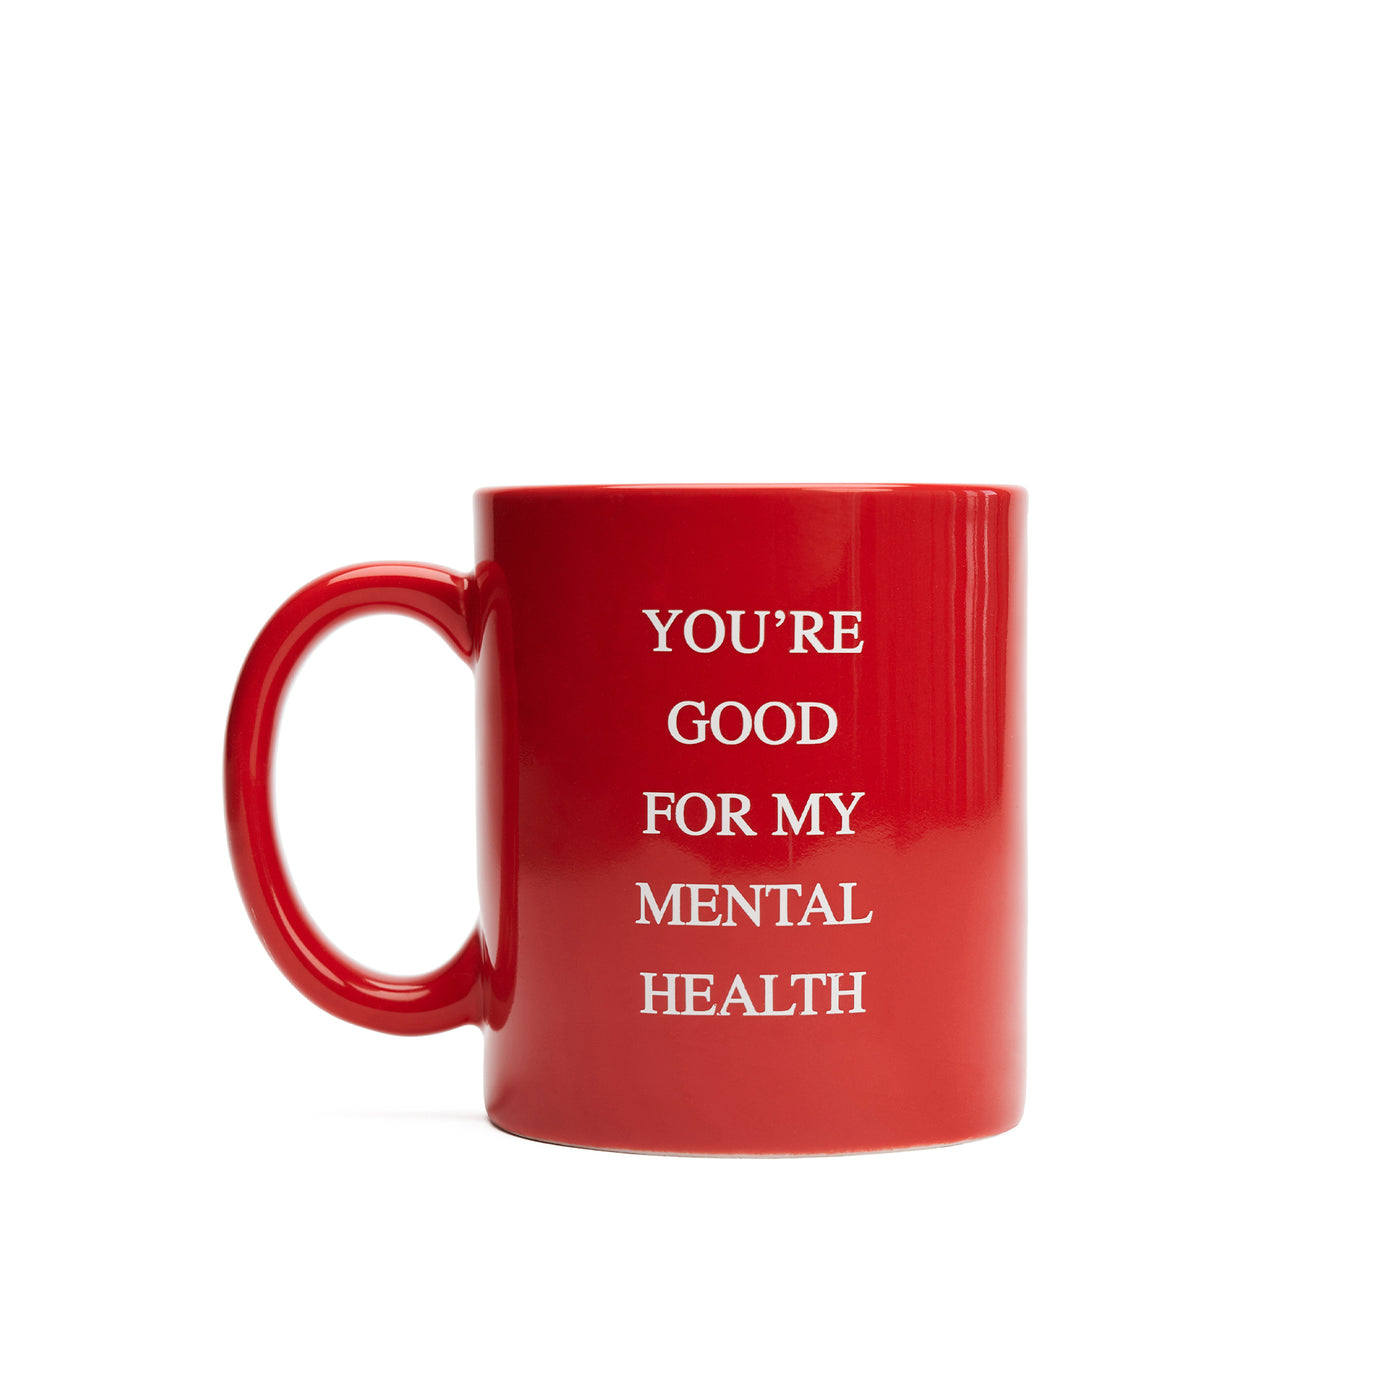 We're Not Really Strangers Mental Health red mug that reads "You're good for my mental health"